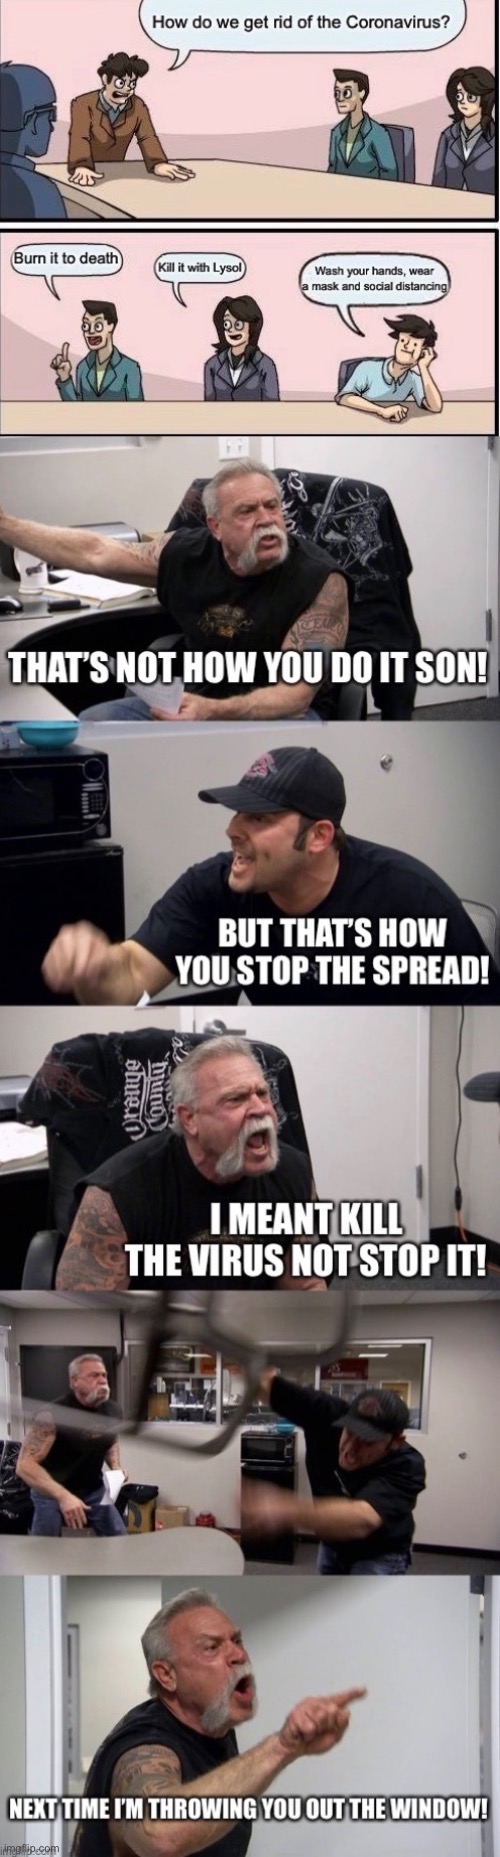 Boardroom Meeting Gone Wrong | image tagged in memes,boardroom meeting suggestion,american chopper argument | made w/ Imgflip meme maker